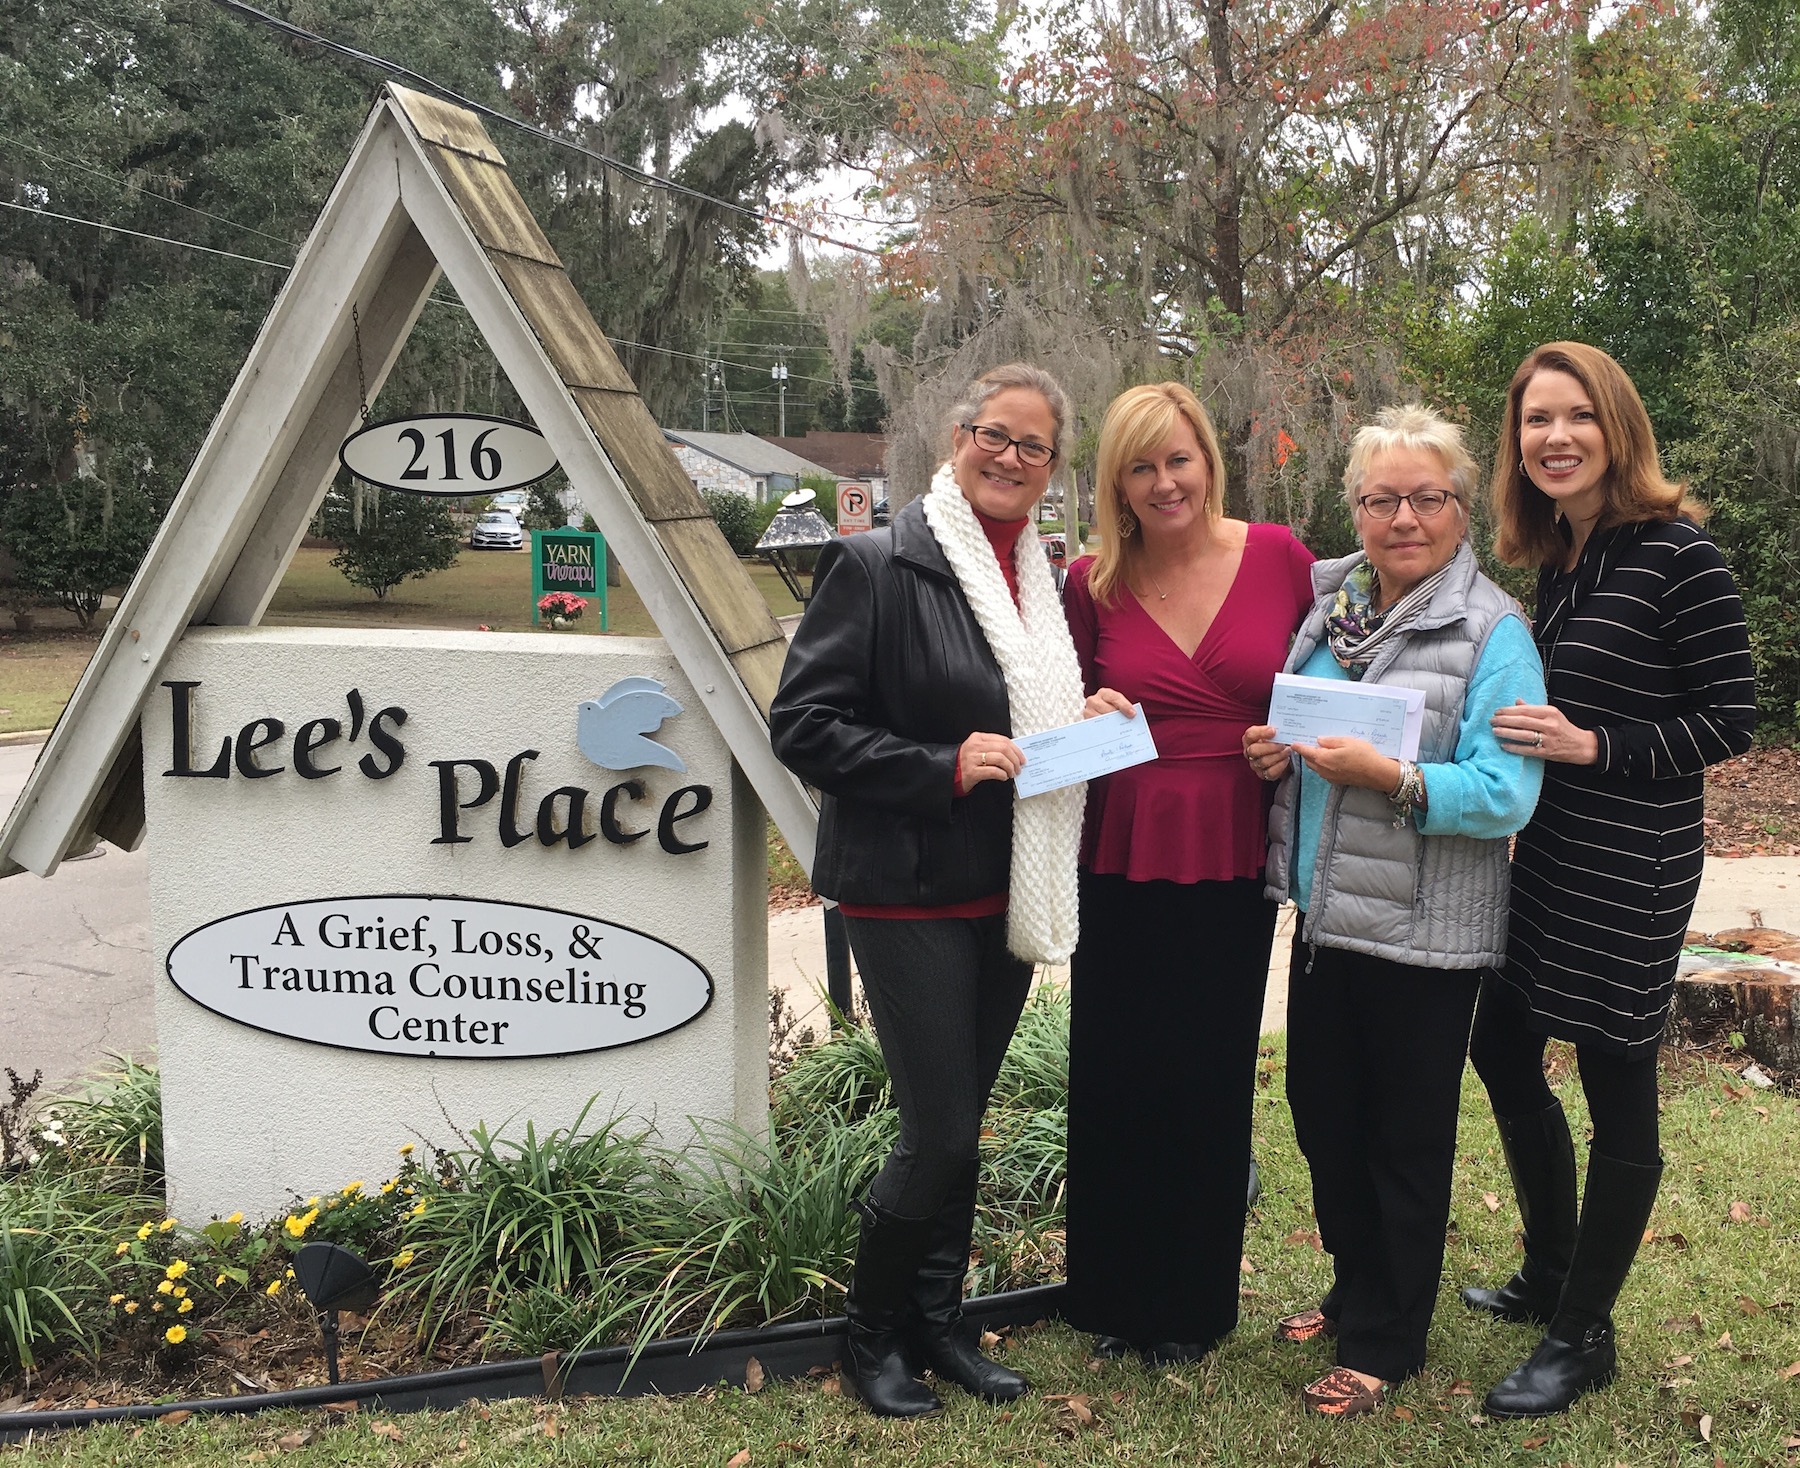 The AAML Foundation presenting a check to Lee's Place staff on Tuesday, December 20th, 2016.